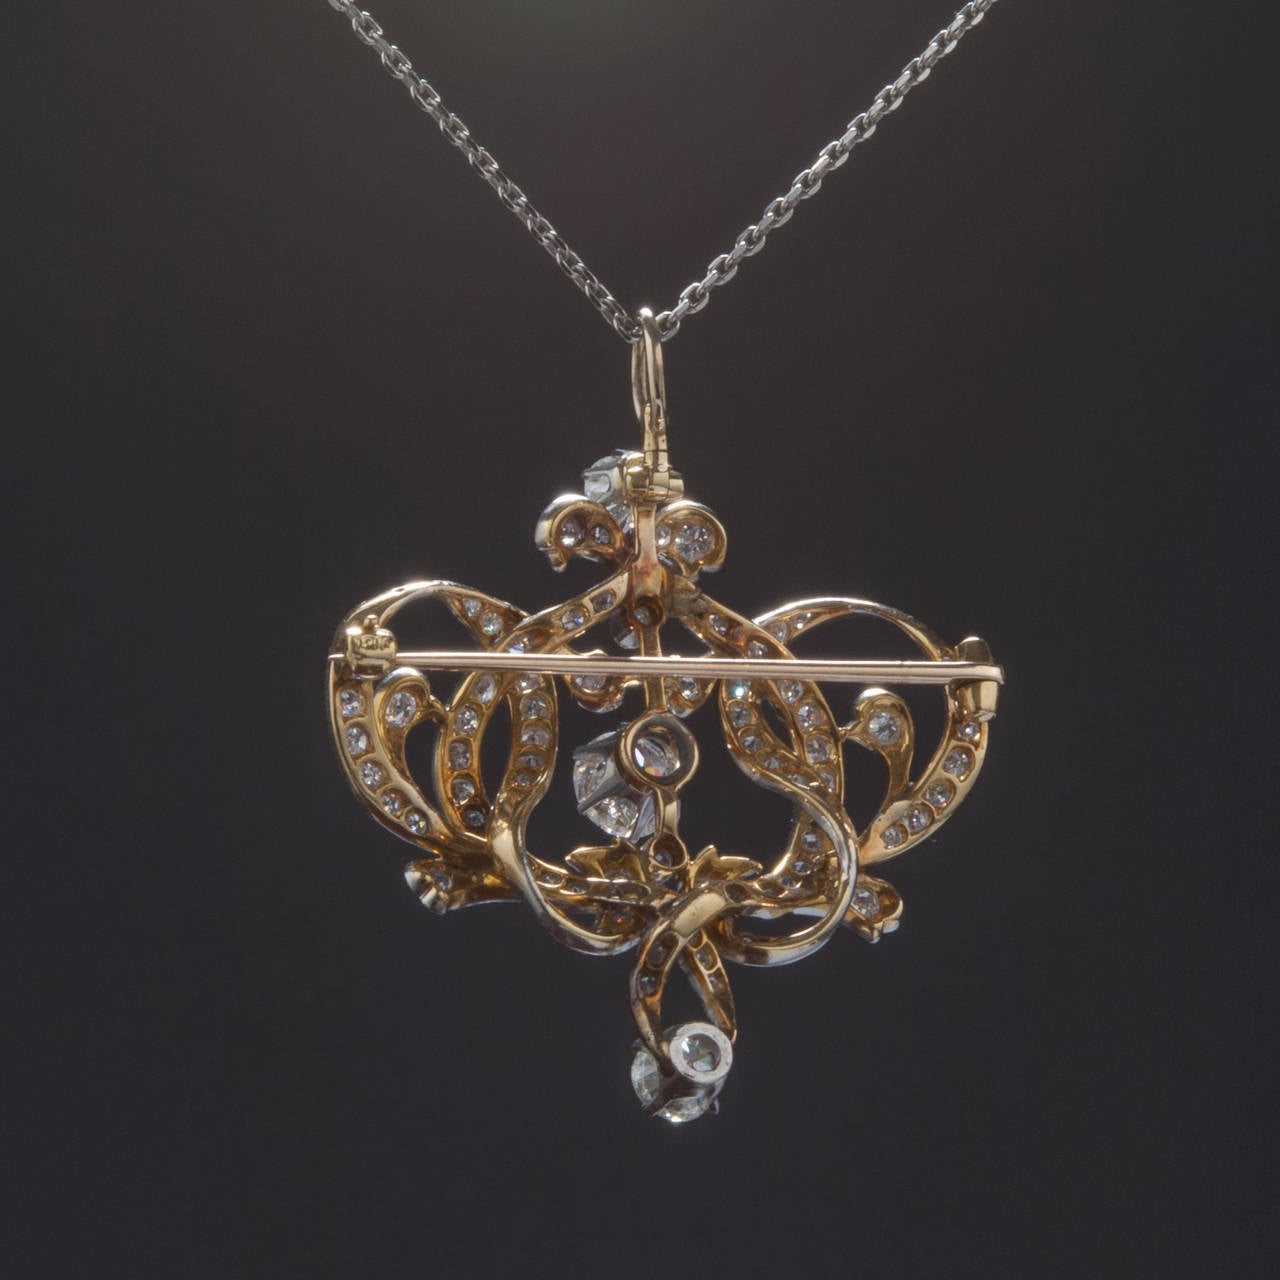 Edwardian Diamond Platinum-on-Gold Pendant/Brooch In Excellent Condition For Sale In Carmel, CA